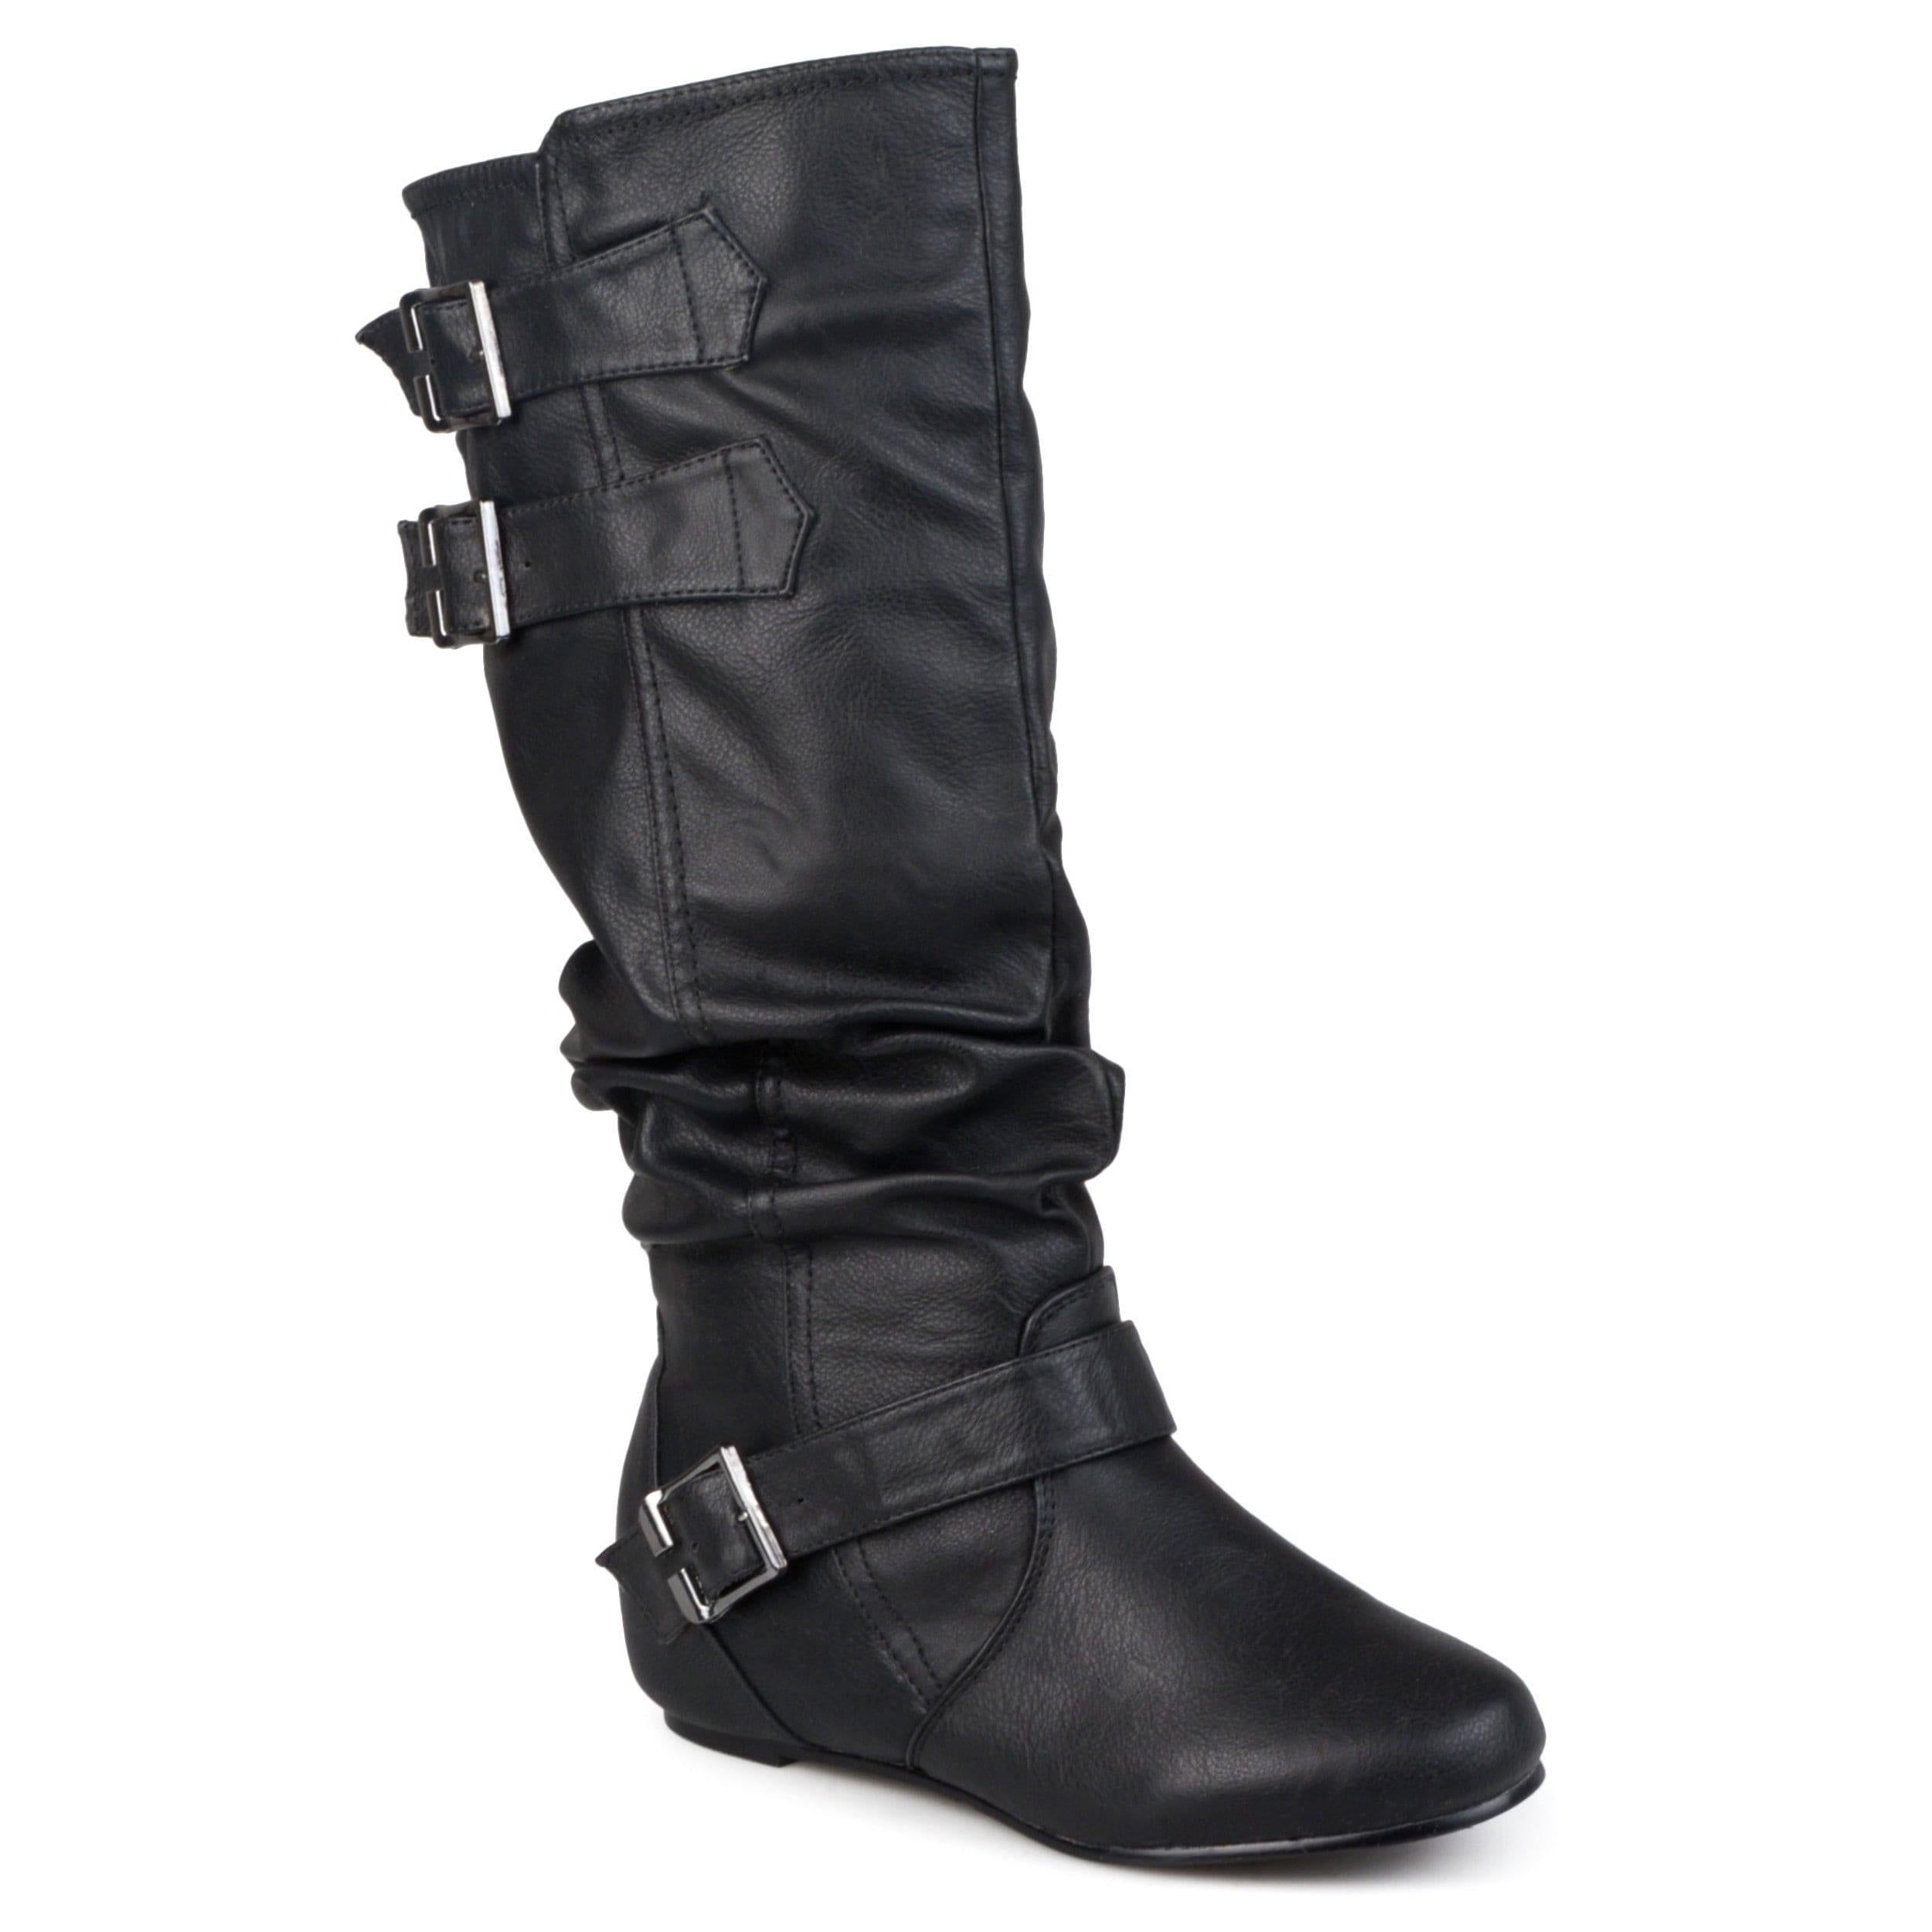 Tiffany Boot | Women's Slouchy Boots | Journee Collection